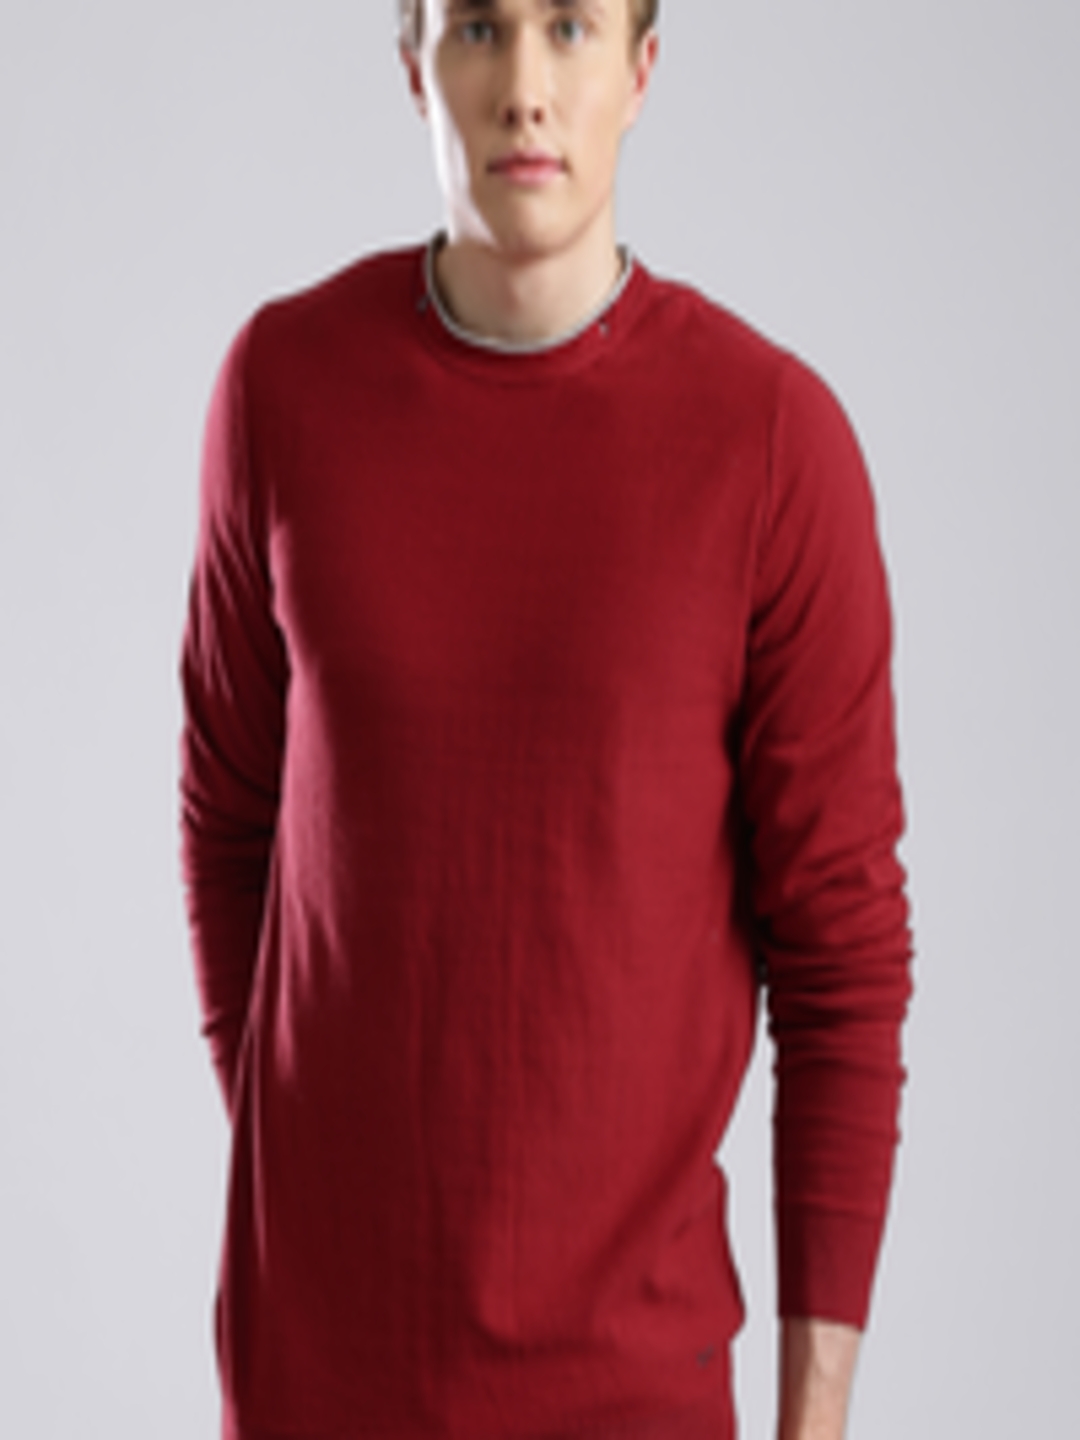 Buy GAS Red Sweater - Sweaters for Men 1174054 | Myntra